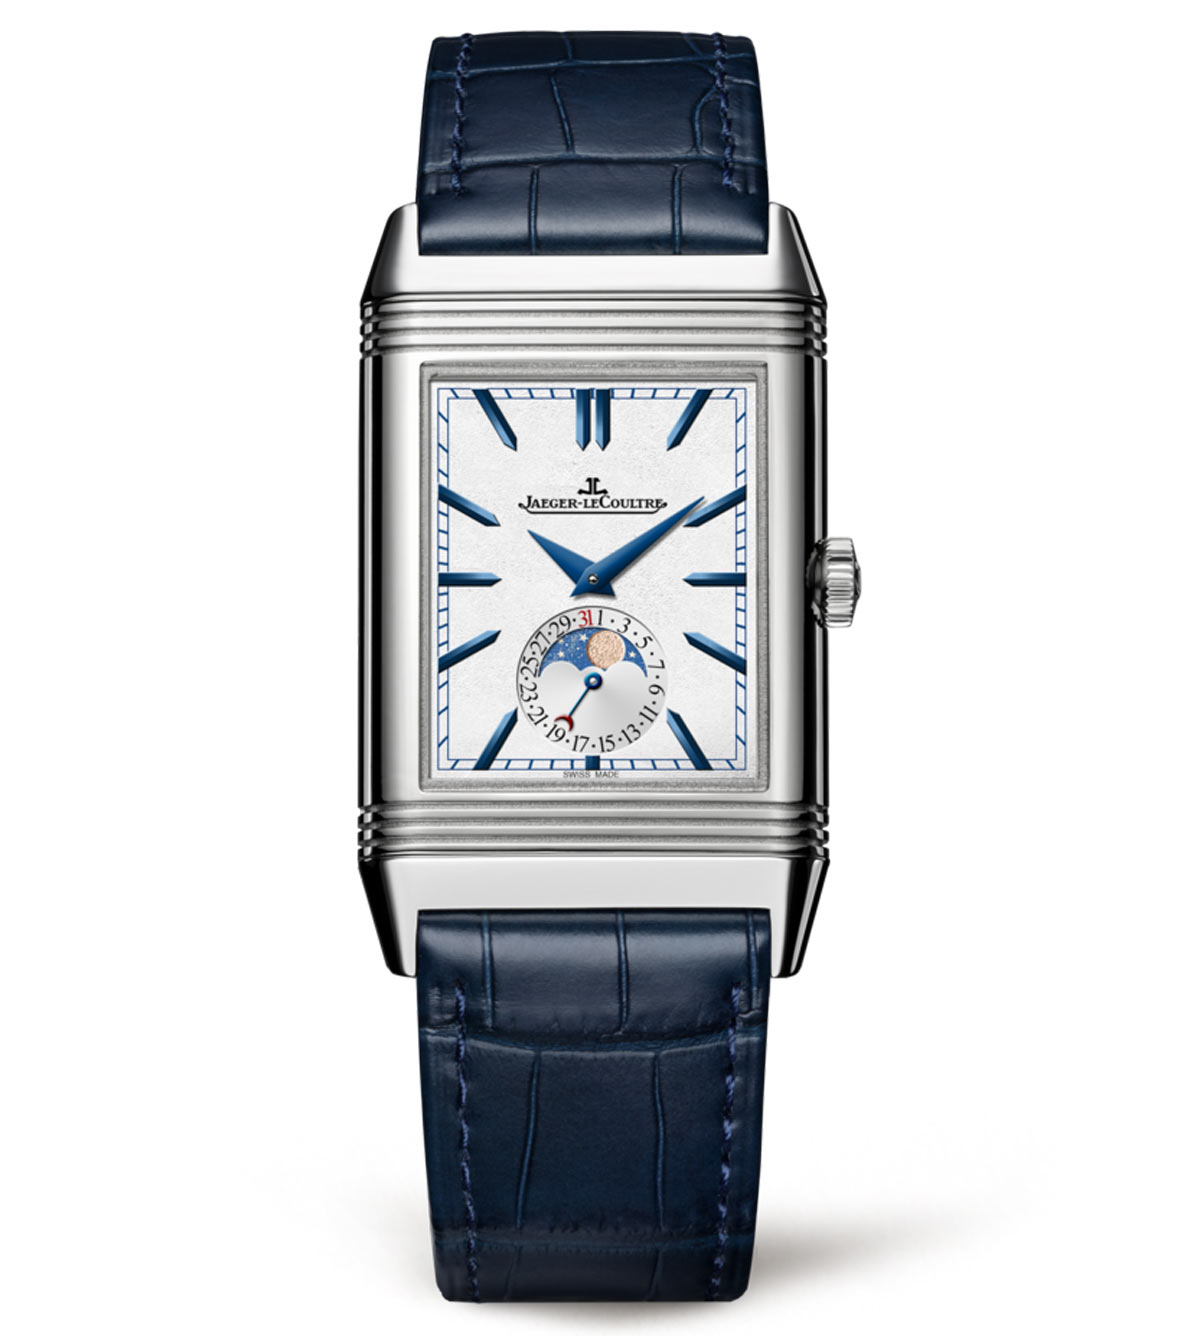 SIHH 2017: Jaeger-LeCoultre - Reverso Tribute, new models | Time and ...